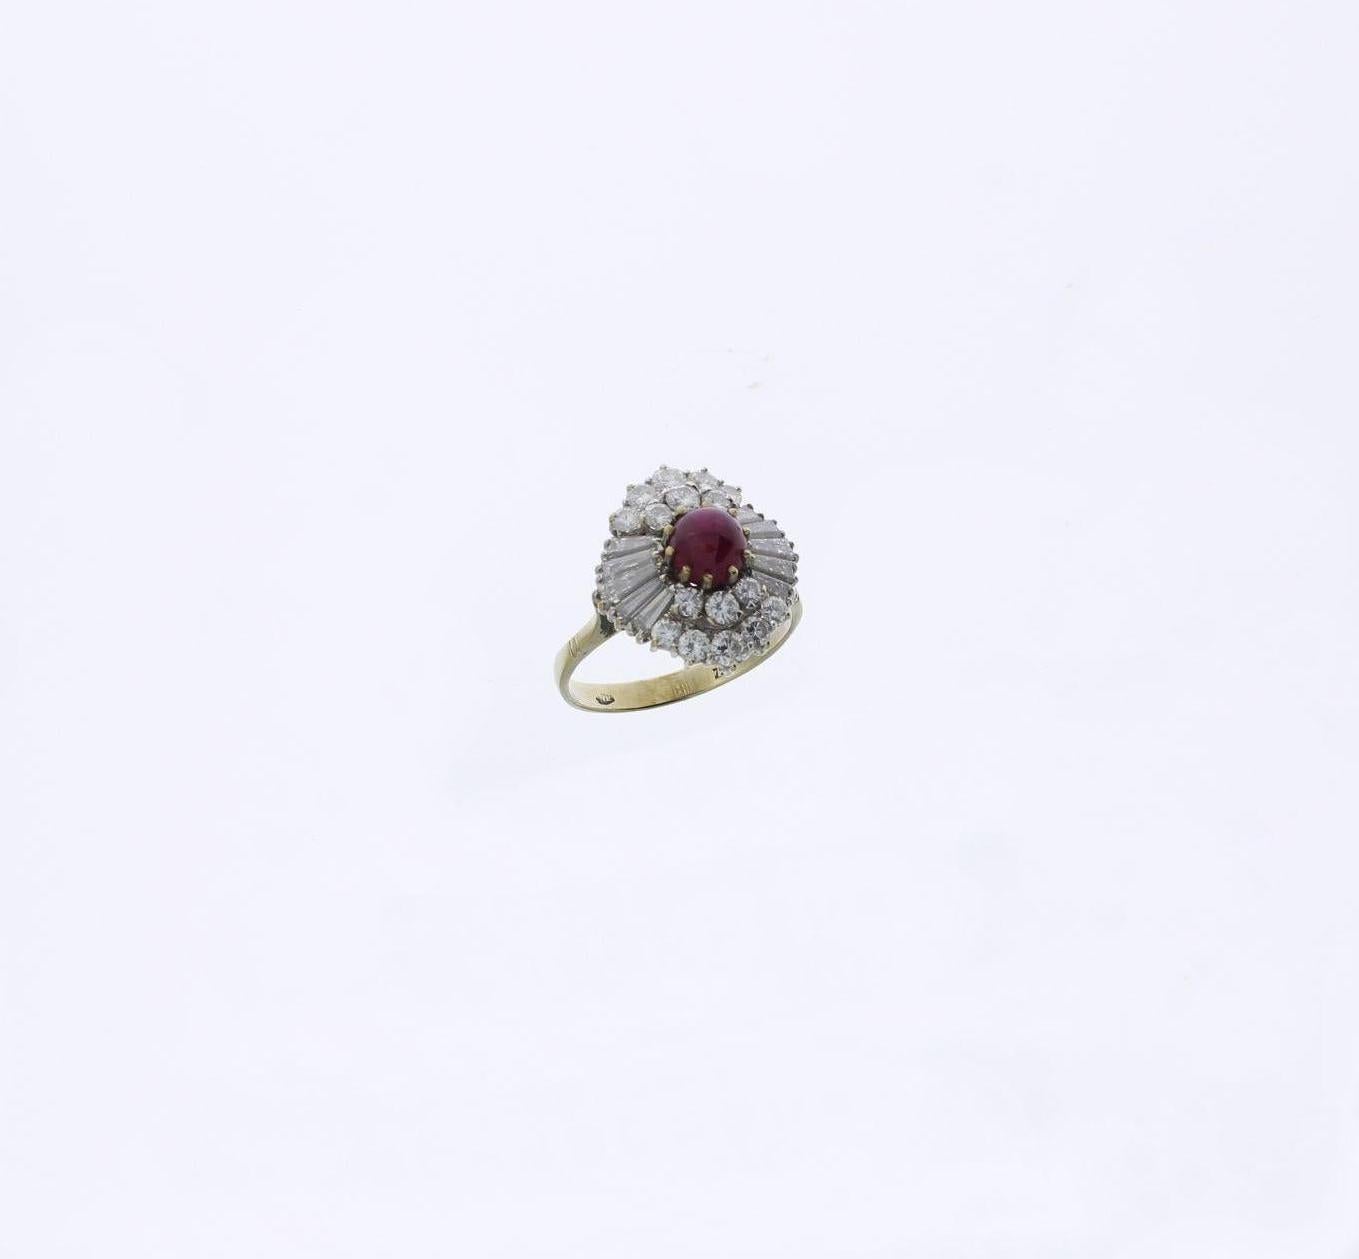 Pavé set with cabochon-cut ruby weighing approximately 1,0 ct., 10 baguette-cut diamonds weighing total ca. 1,10 ct. 
and 16 brilliant-cut diamonds with a total weight of ca. 0,66 ct. Mounted in 18 carat white- and yellow gold. 
Hallmarked with the